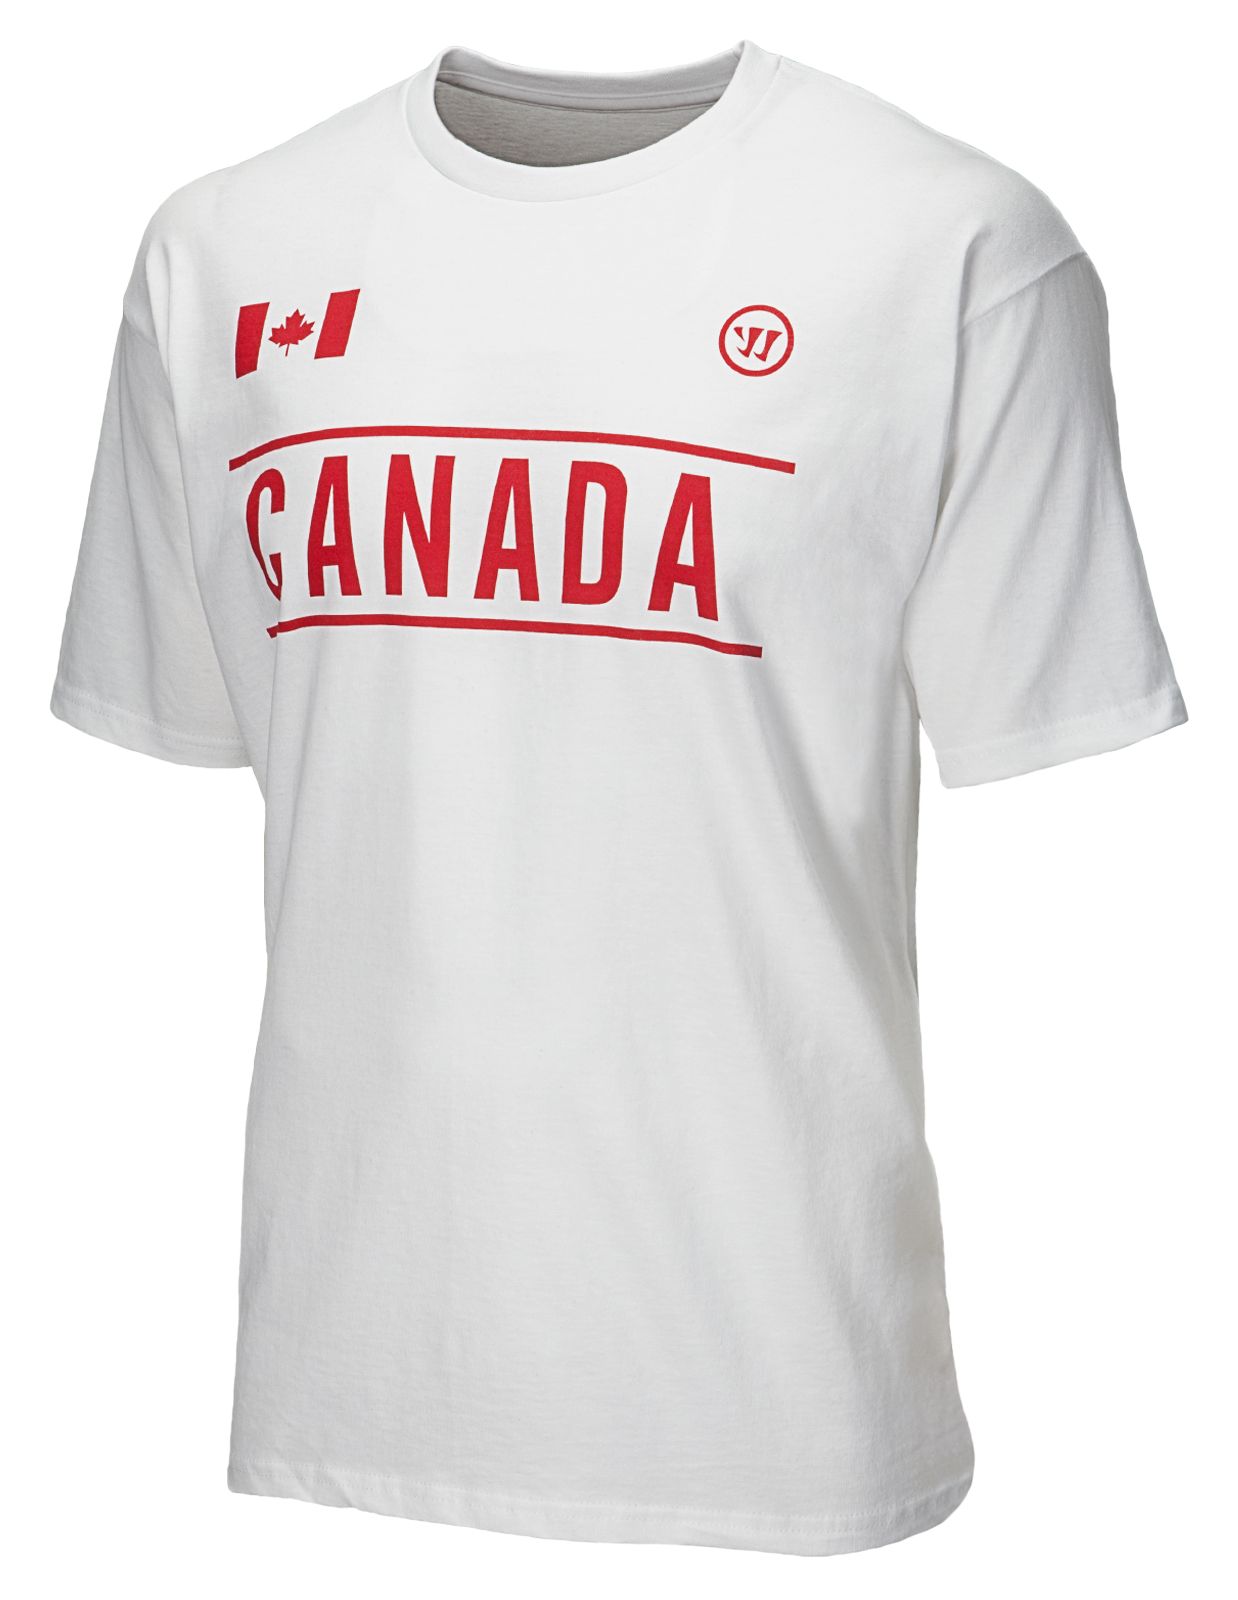 Team Canada Tee, White with Red image number 1